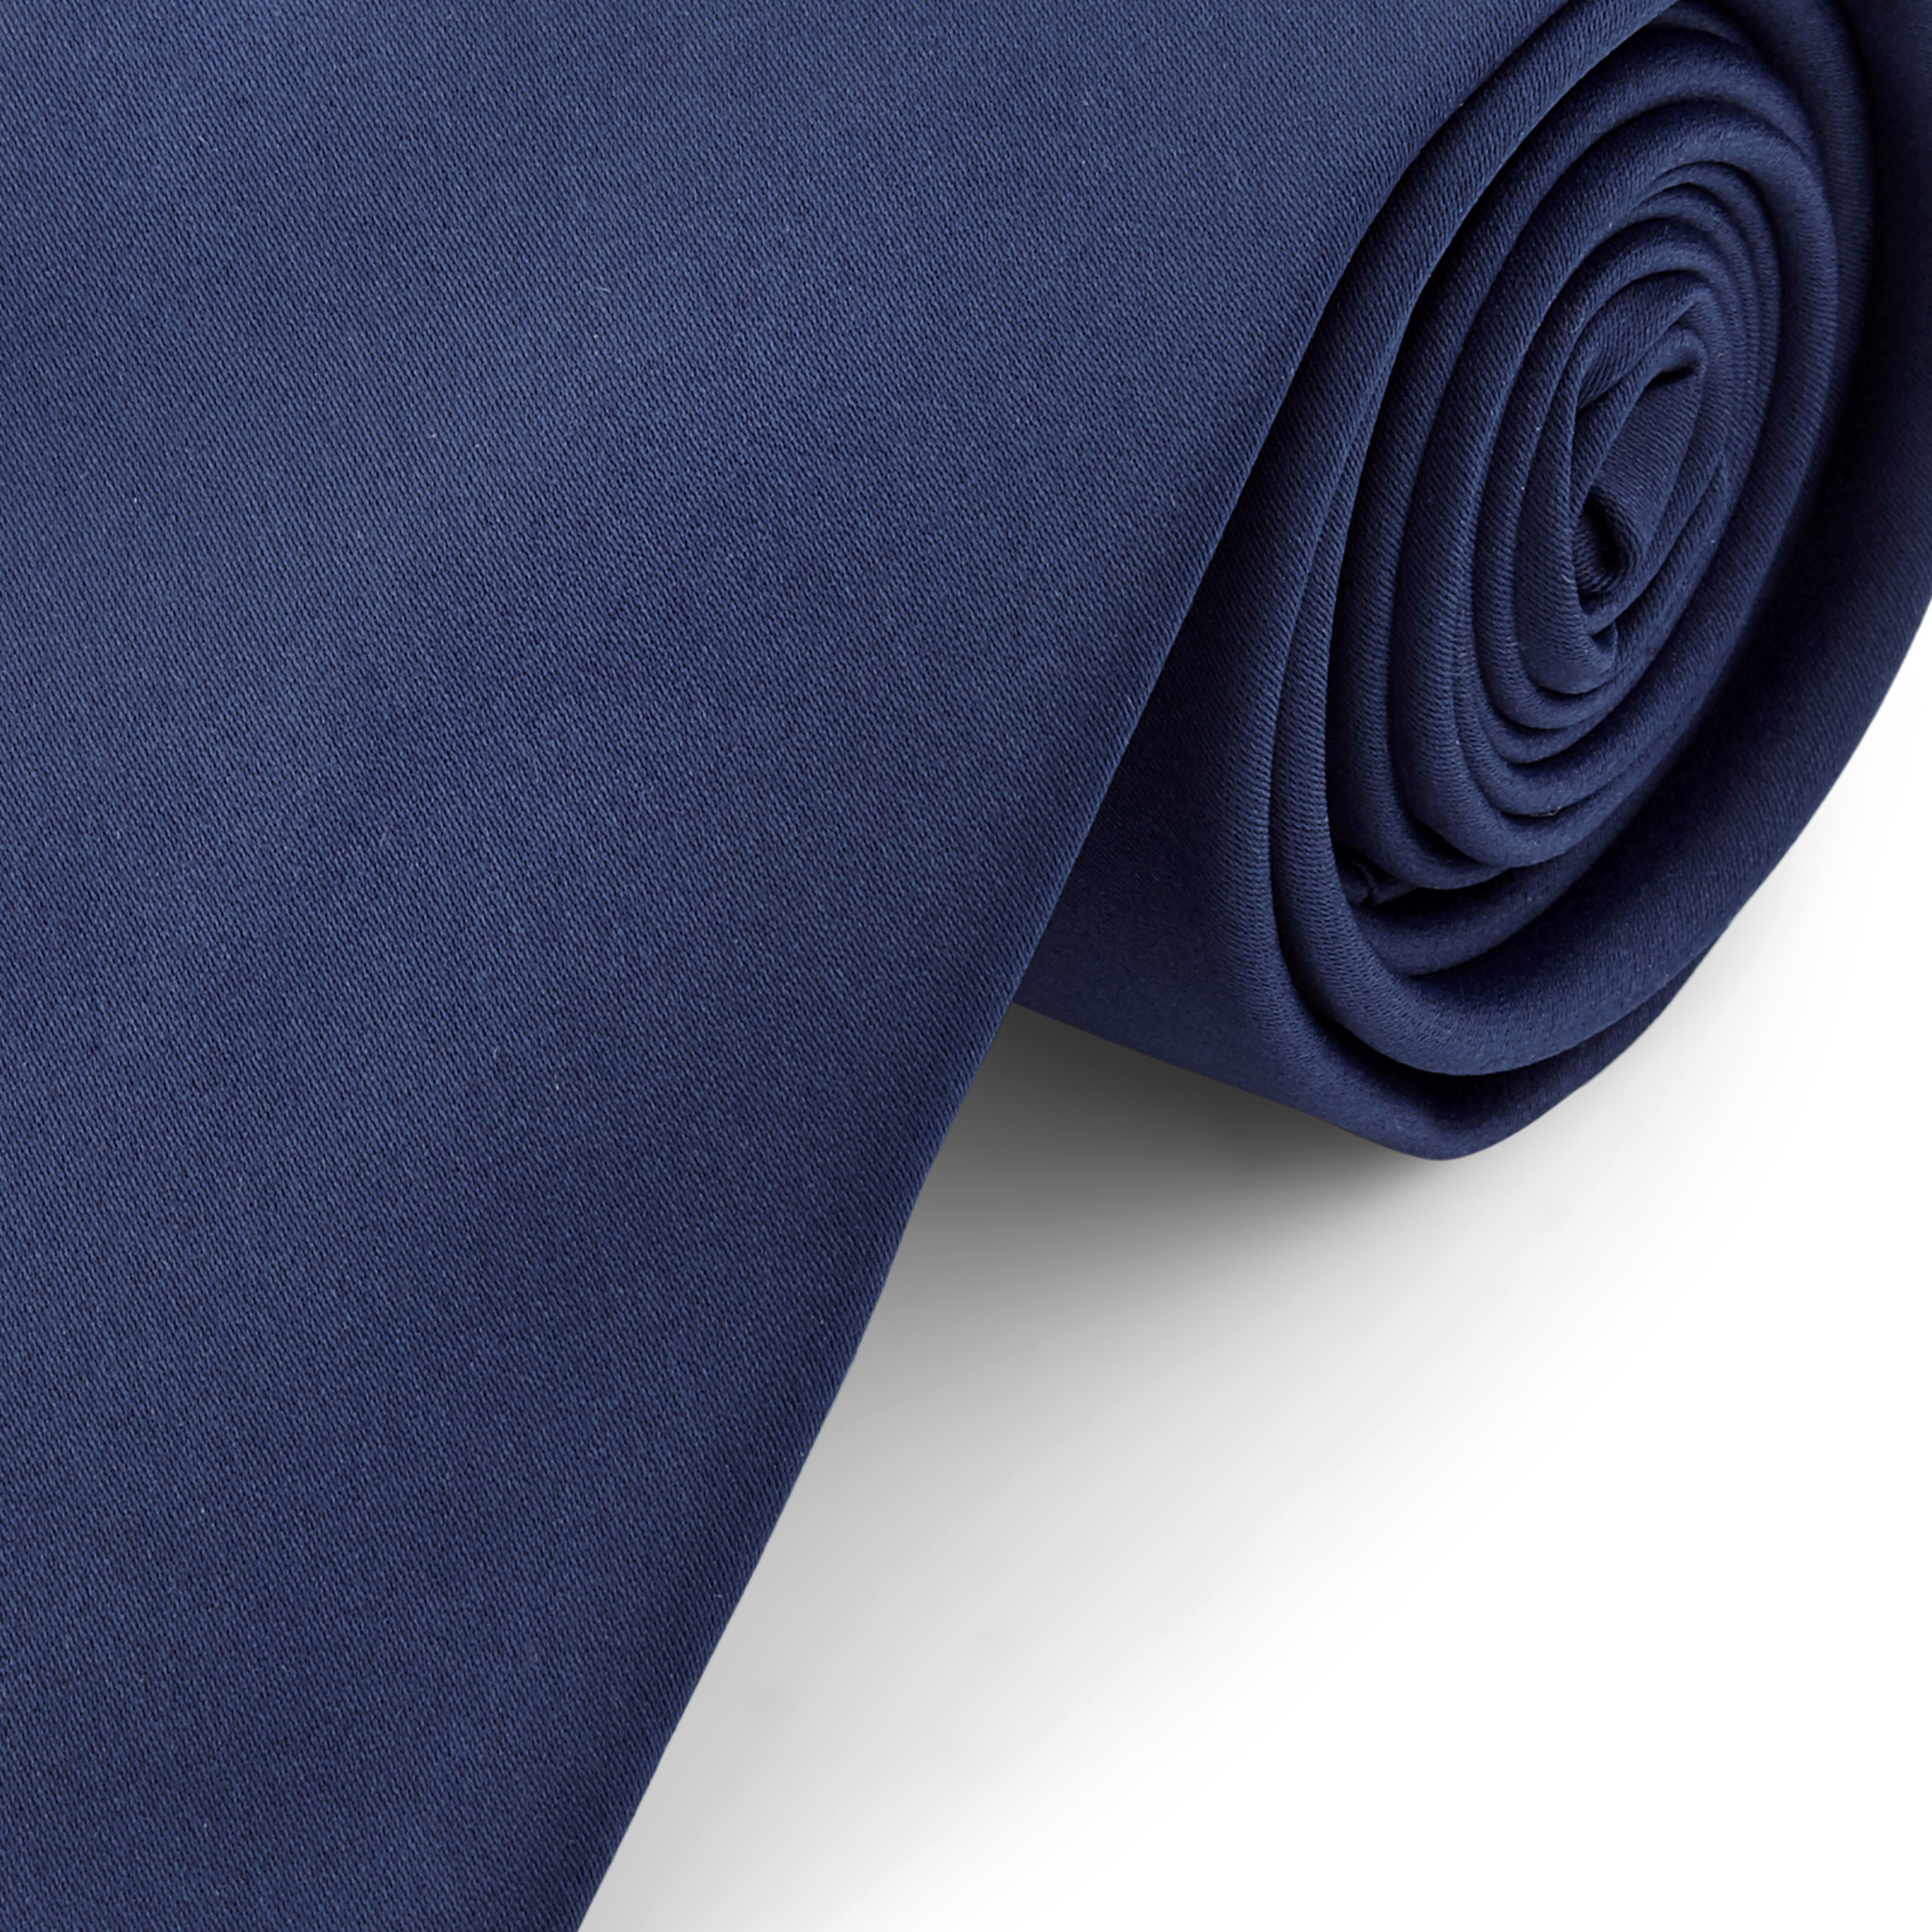 Basic Wide Navy Blue Polyester Tie, In stock!